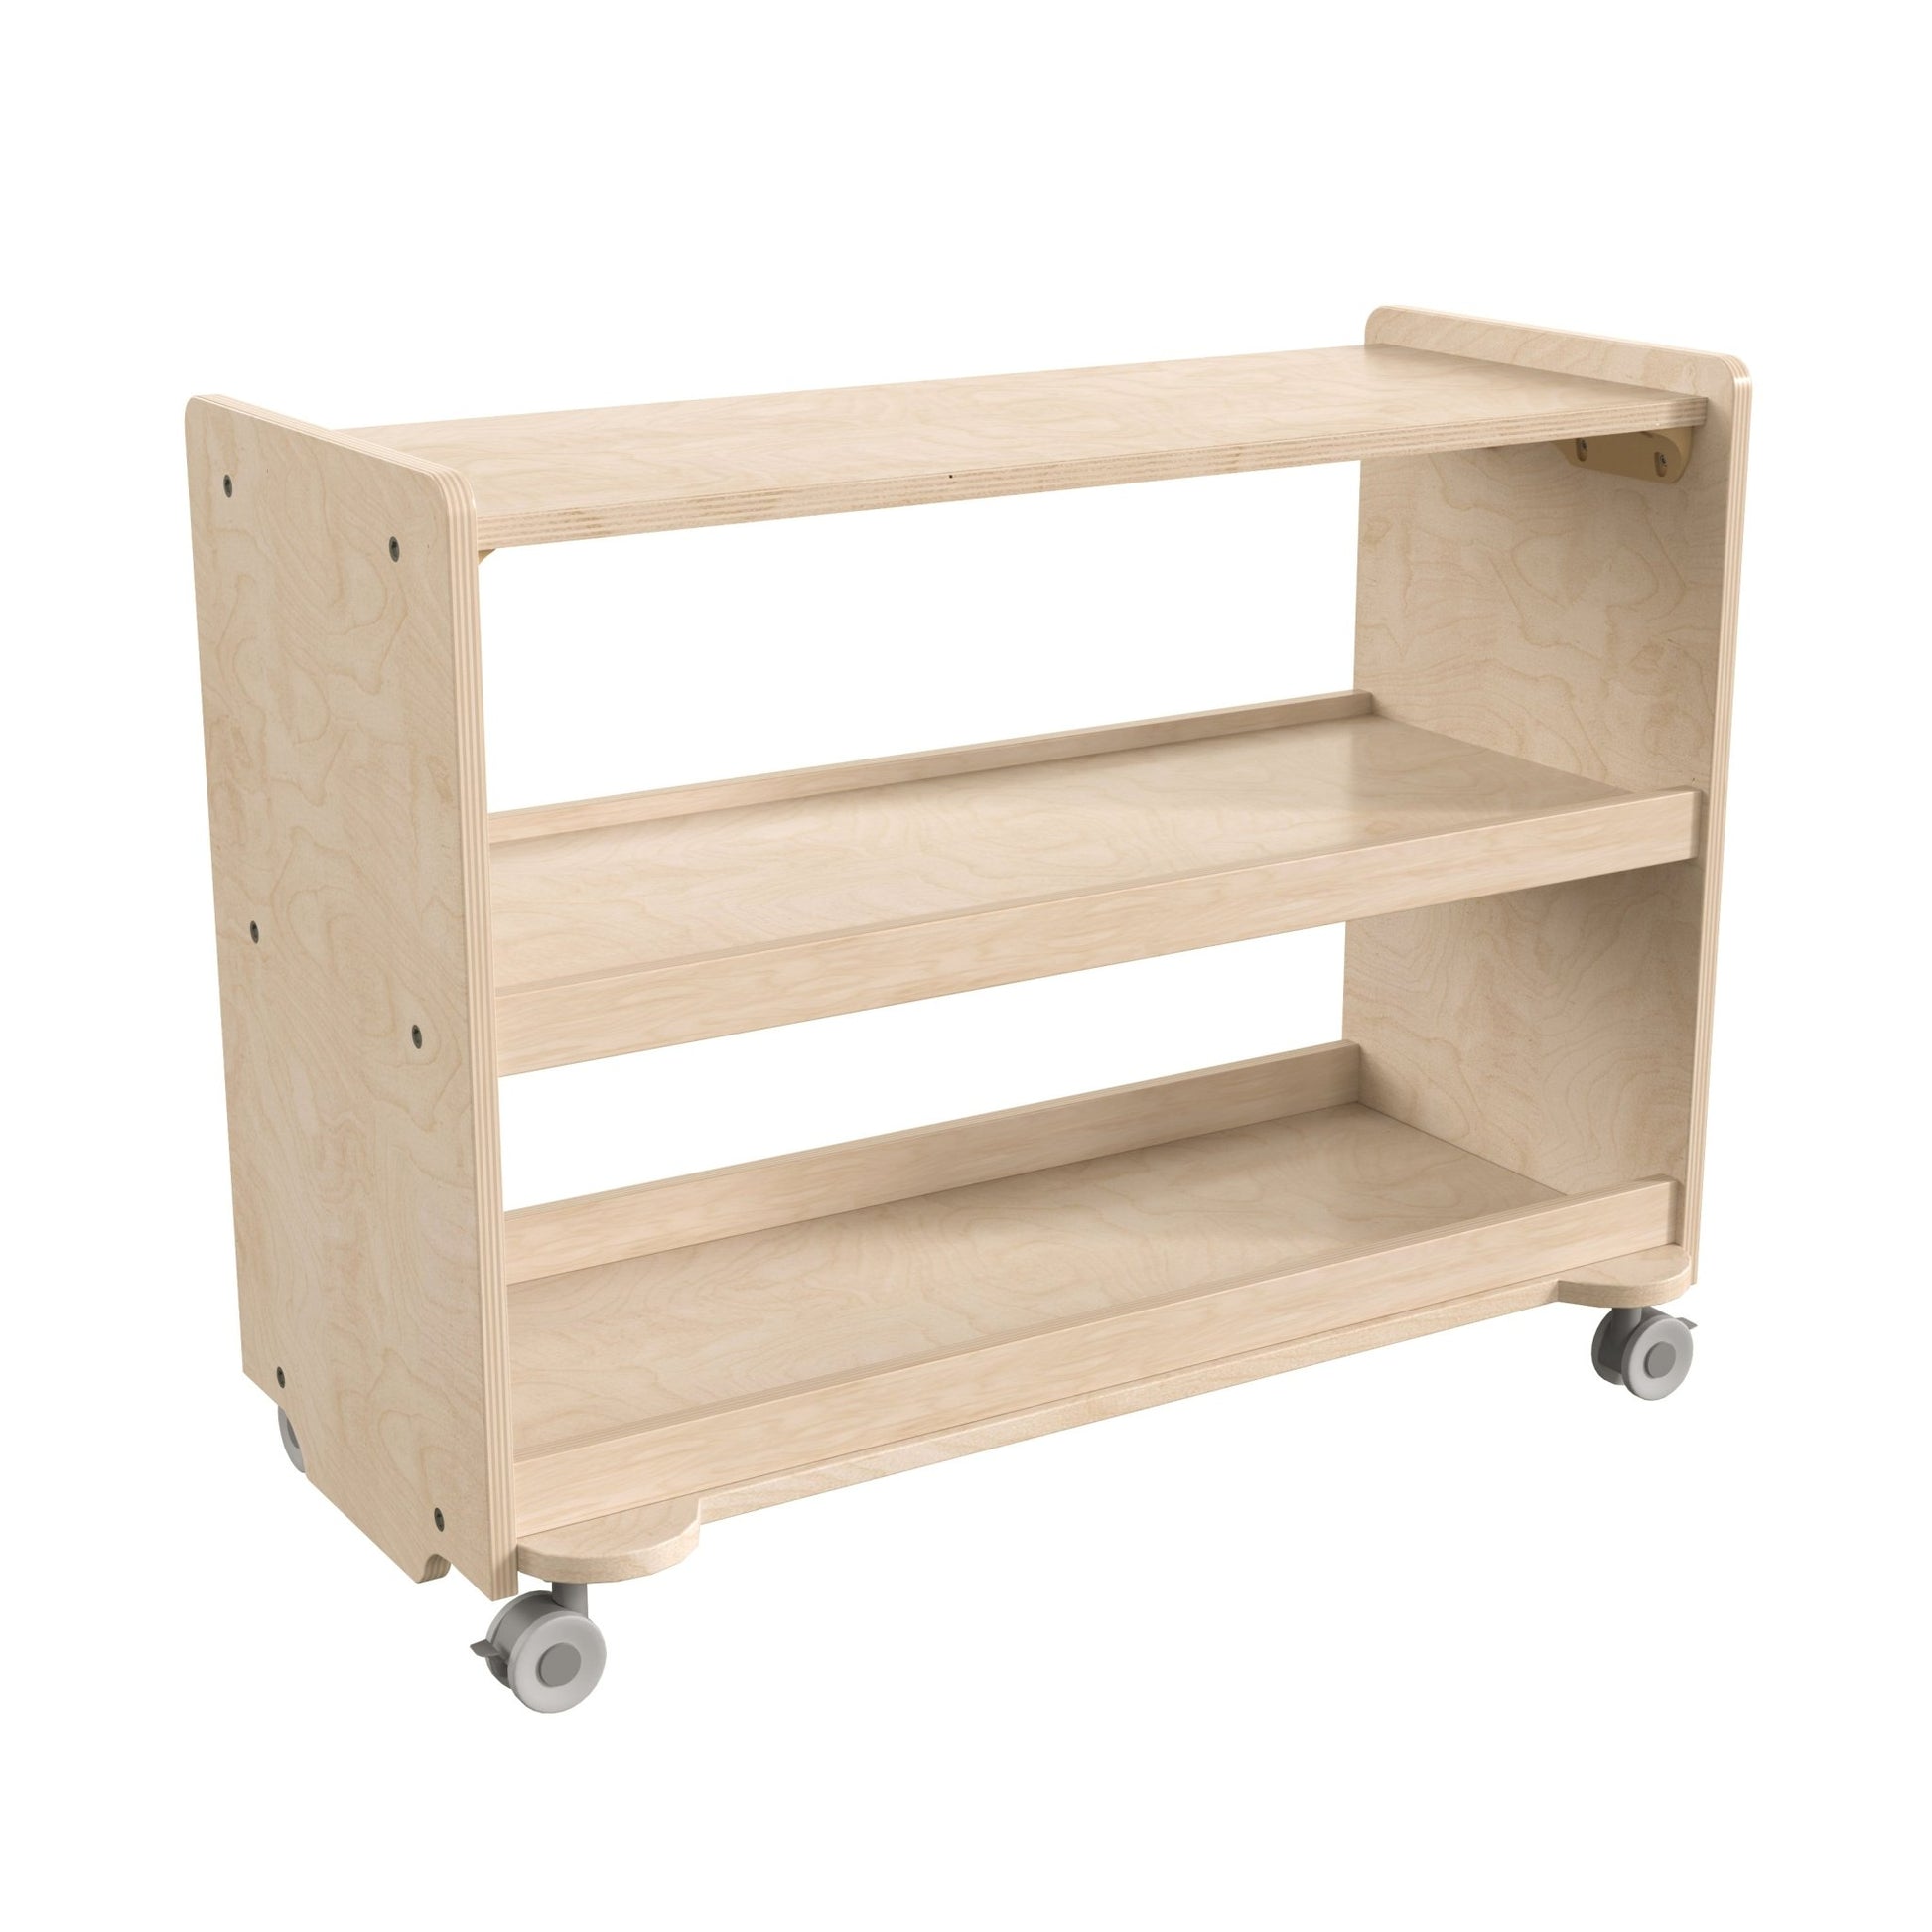 Bright Beginnings Commercial Grade Space Saving 3 Shelf Wooden Mobile Classroom Storage Cart with Locking Caster Wheels, Kid Friendly Design, Natural - SchoolOutlet